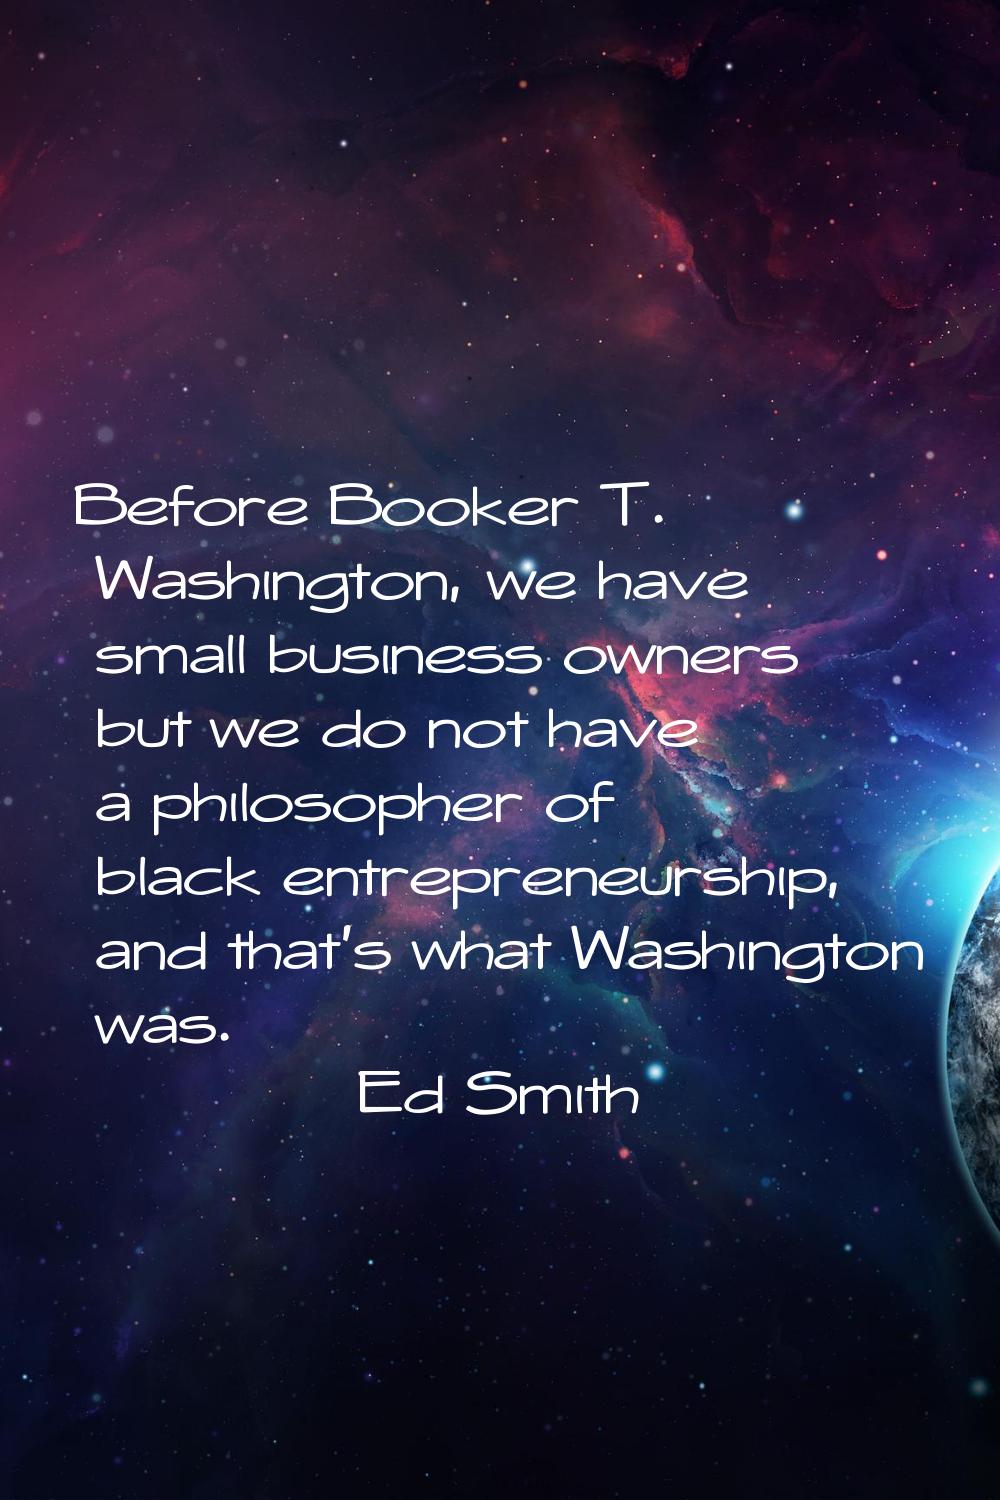 Before Booker T. Washington, we have small business owners but we do not have a philosopher of blac